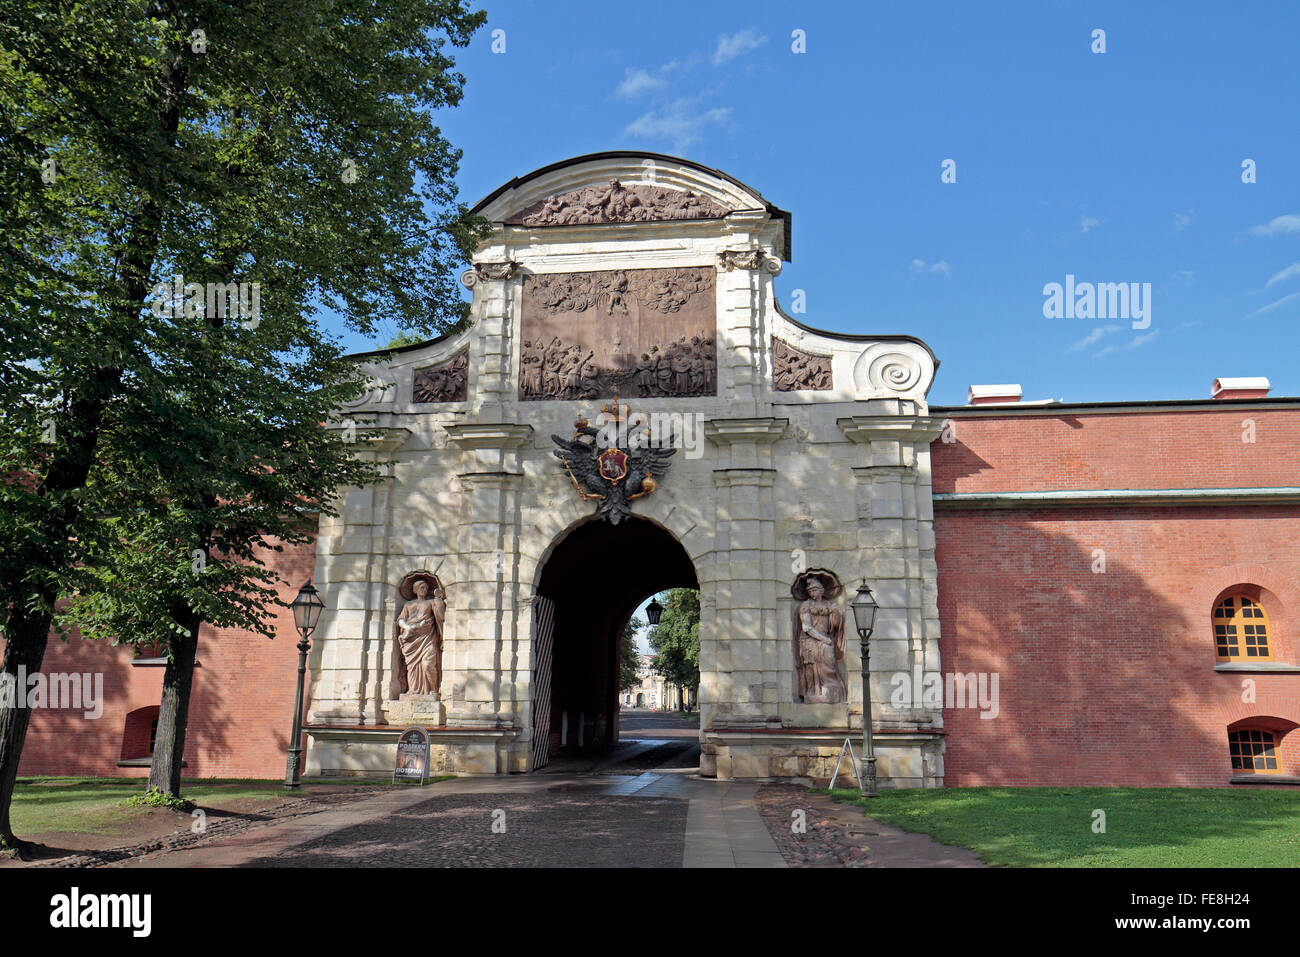 The Petrovskiy Curtain Wall and Gate in the Peter and Paul Fortress in St Petersburg, Russia. Stock Photo